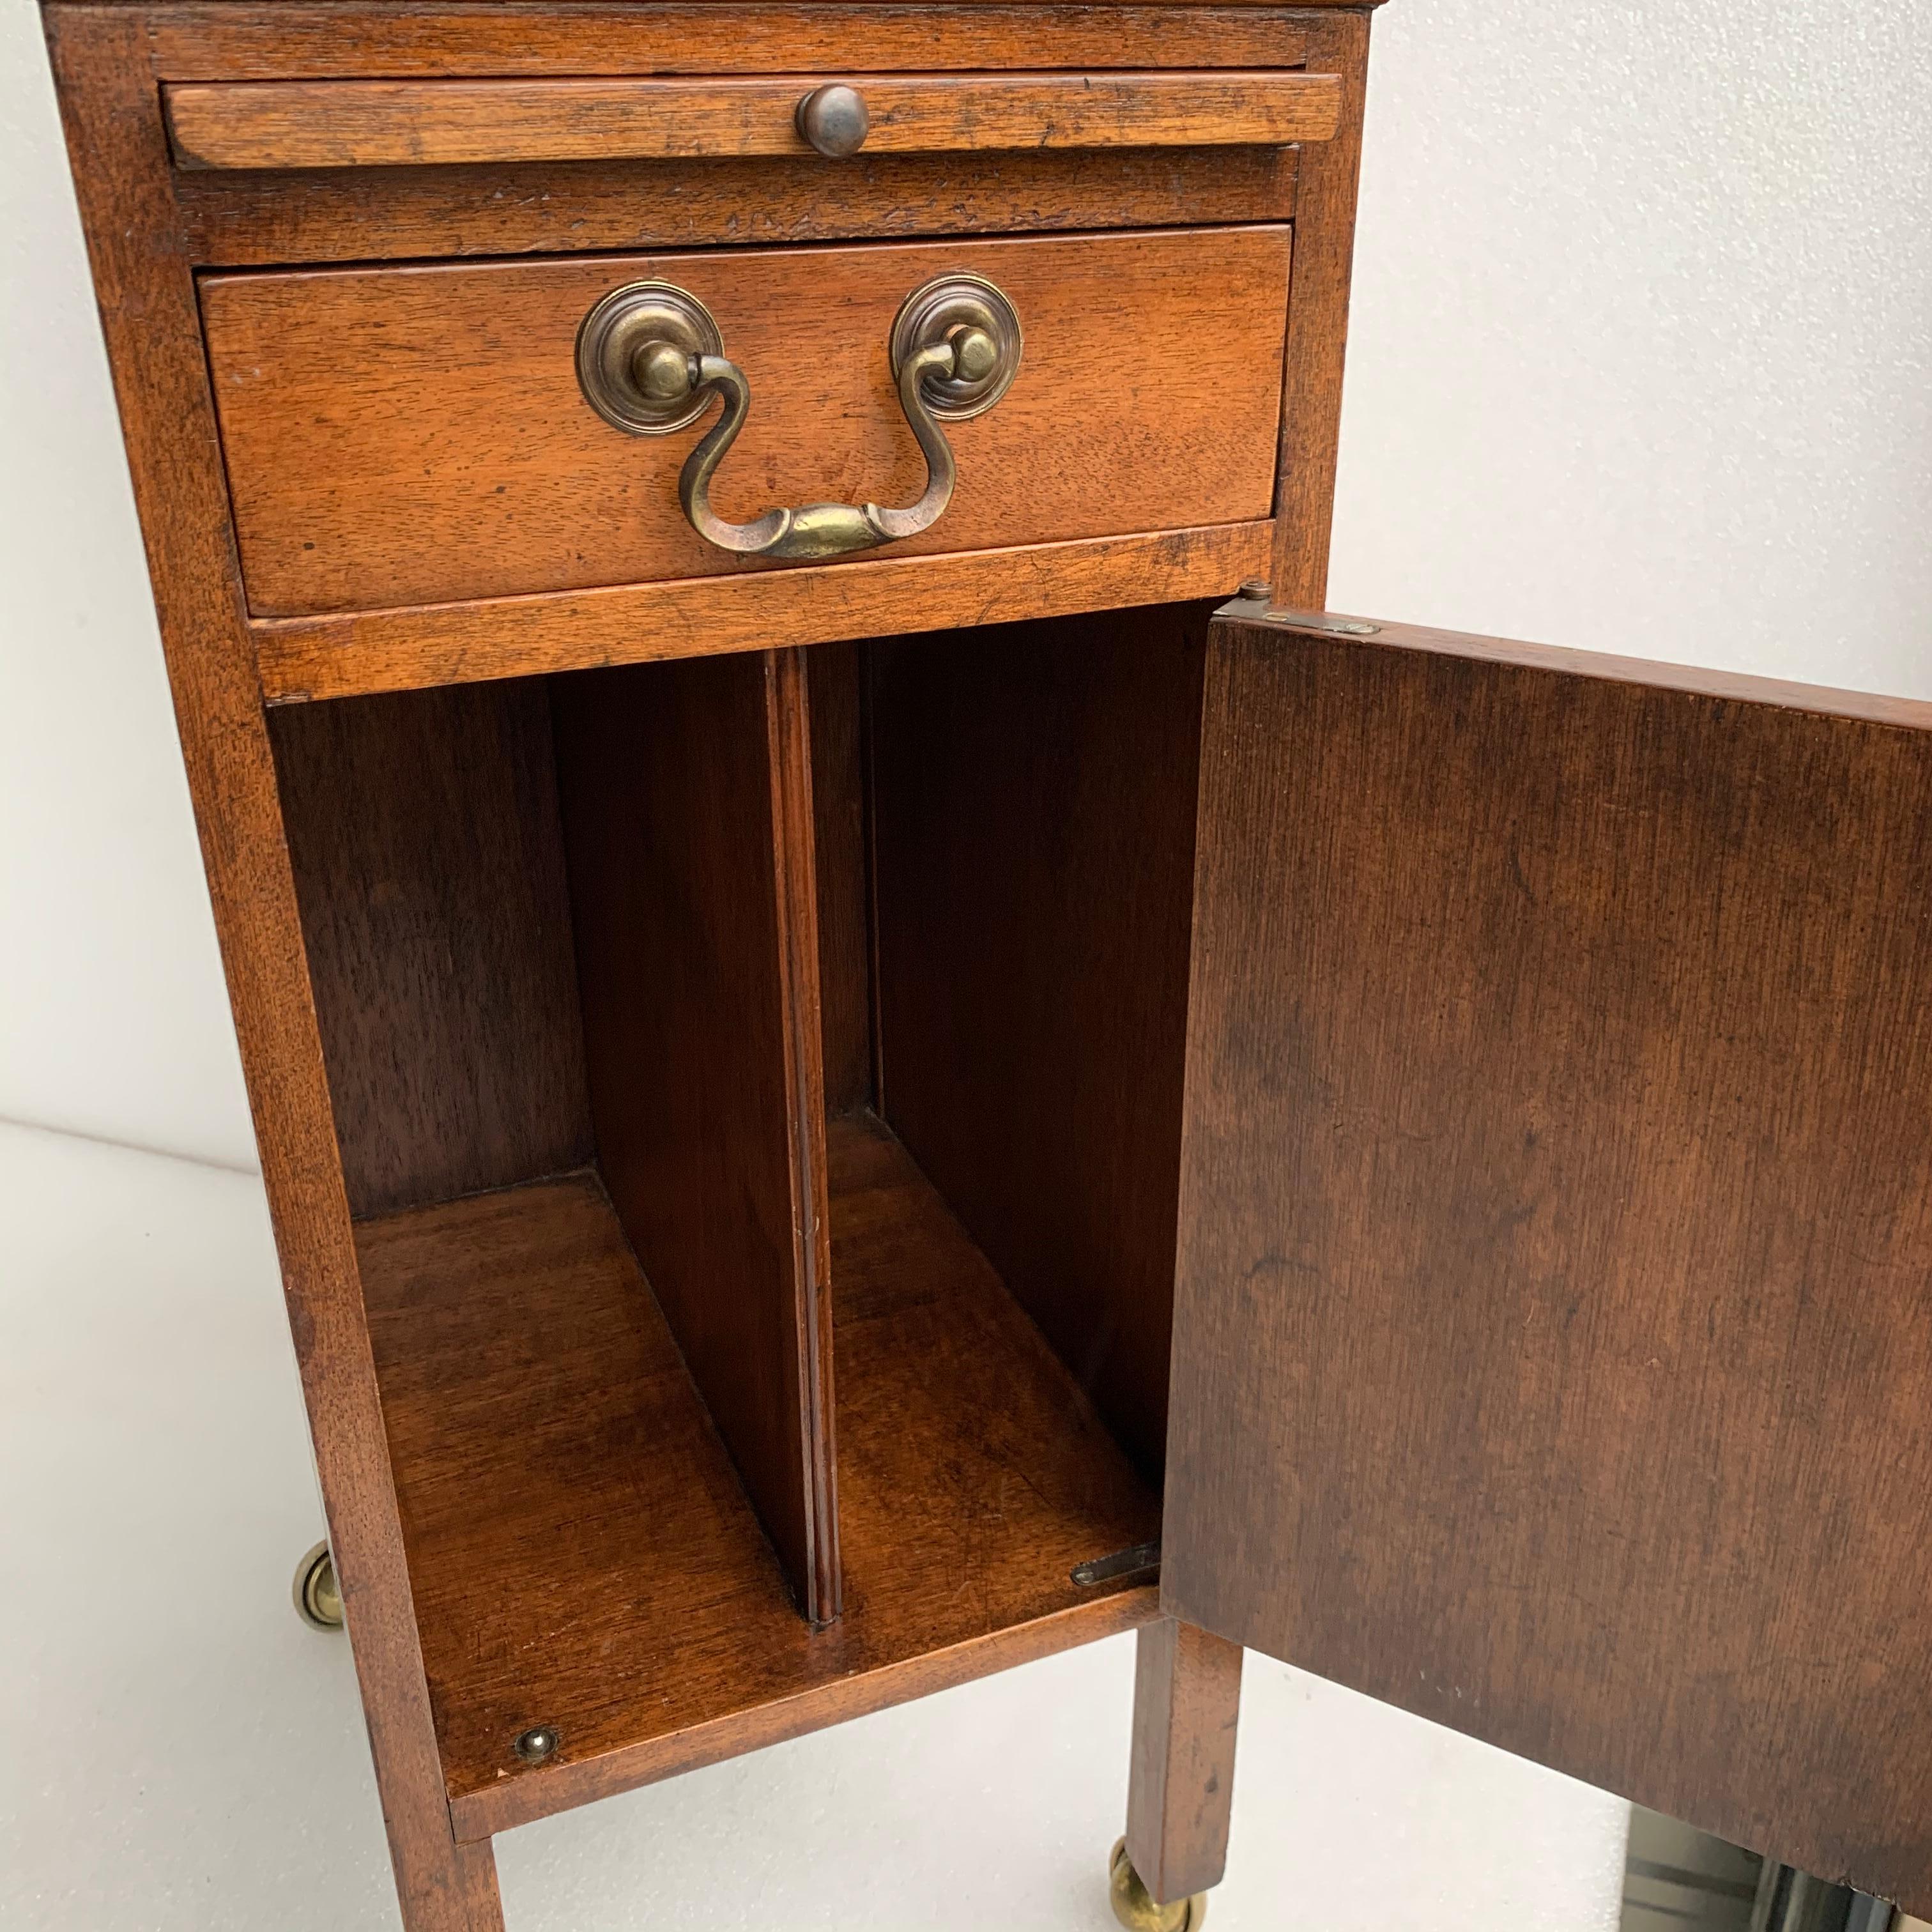 Hand-Crafted Small Georgian Style Bedside Cabinet By Smith & Watson, New York